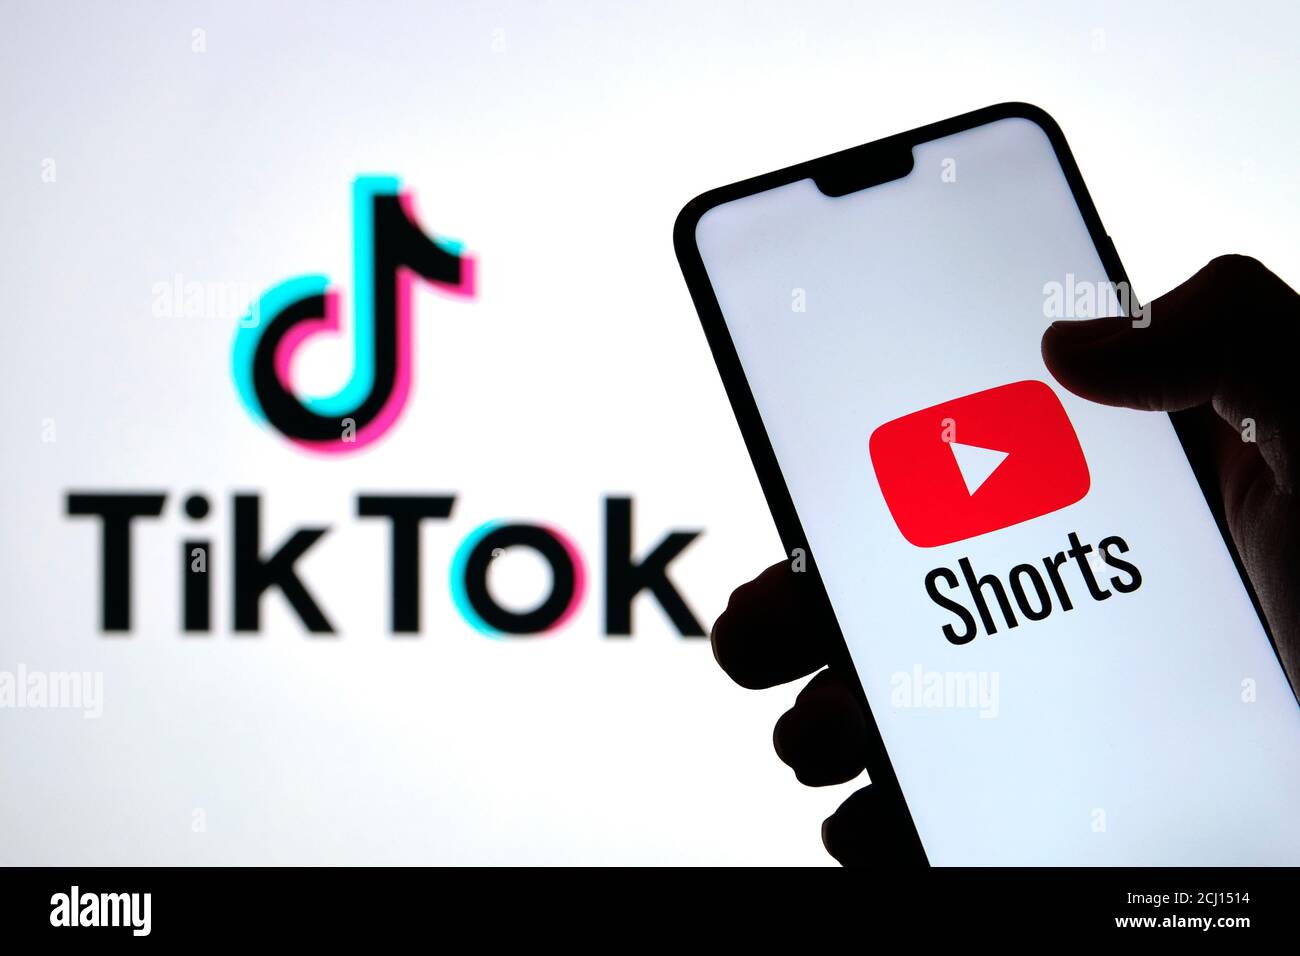 https://c8.alamy.com/comp/2CJ1514/youtube-shorts-app-logo-seen-on-the-silhouette-of-smartphone-in-a-hand-and-tiktok-logo-on-the-blurred-background-real-photo-not-a-montage-2CJ1514.jpg